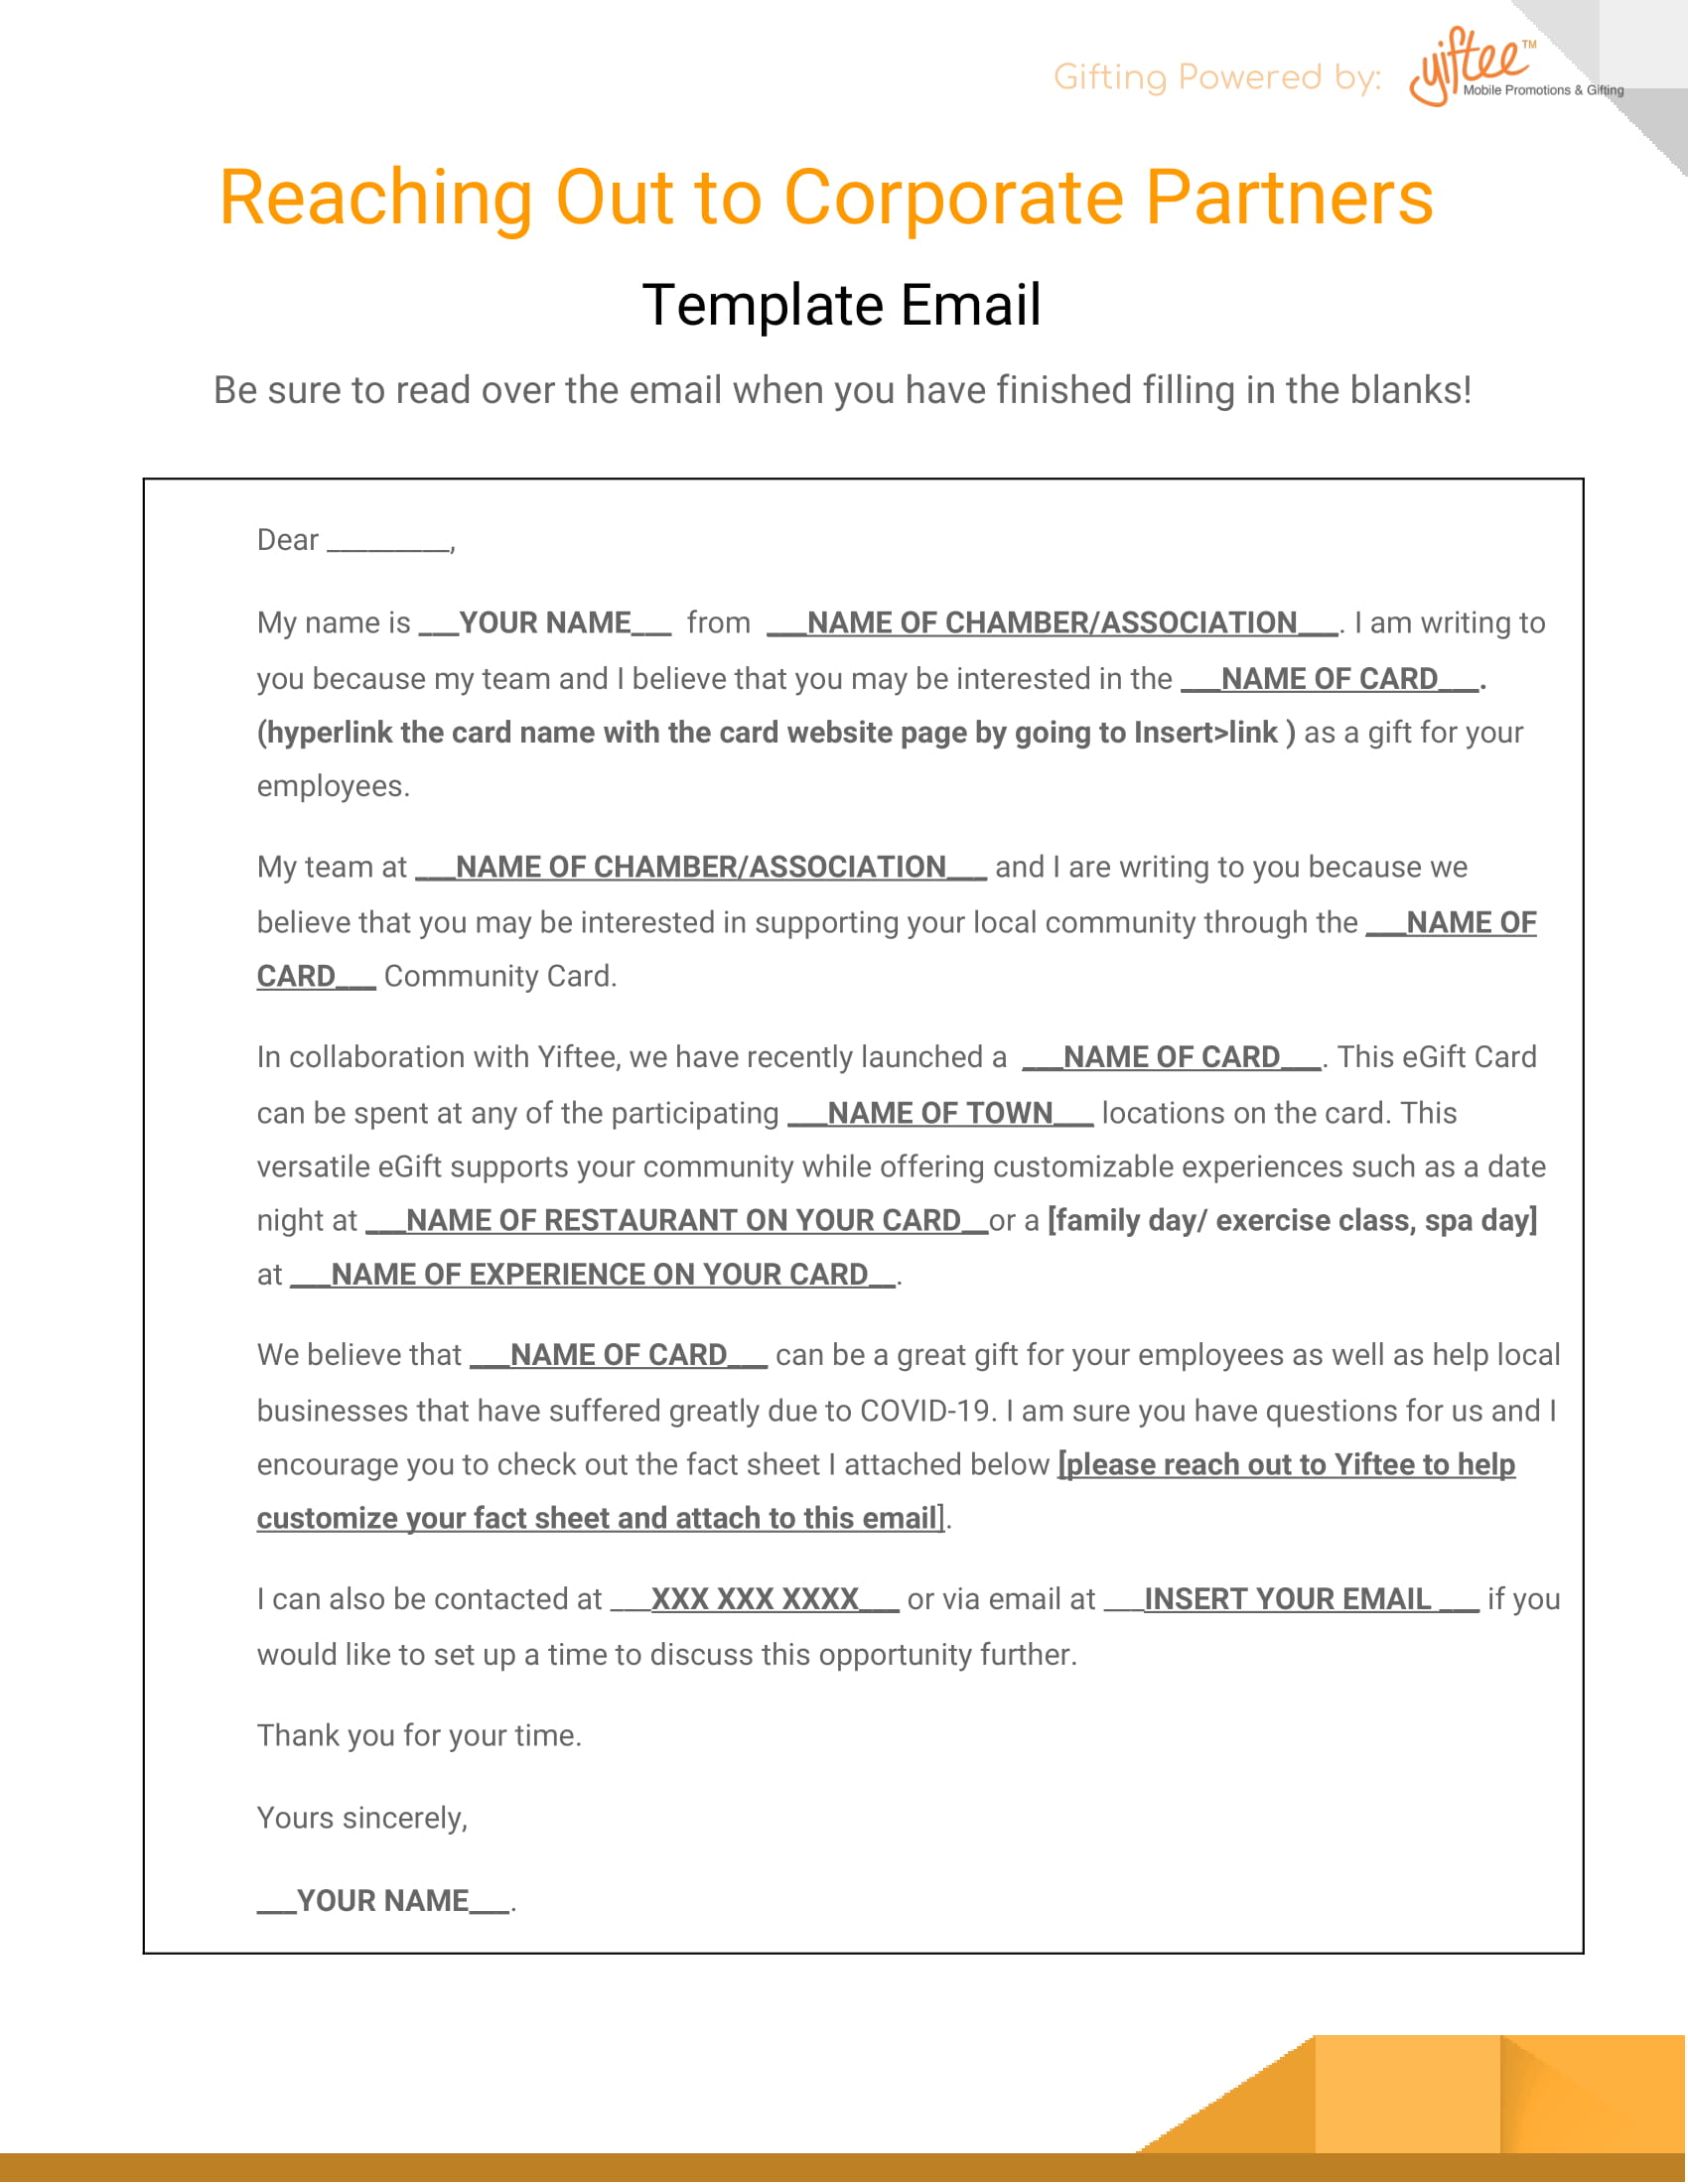 Reaching Out to Corporate Partners Email Template Yiftee Support Center